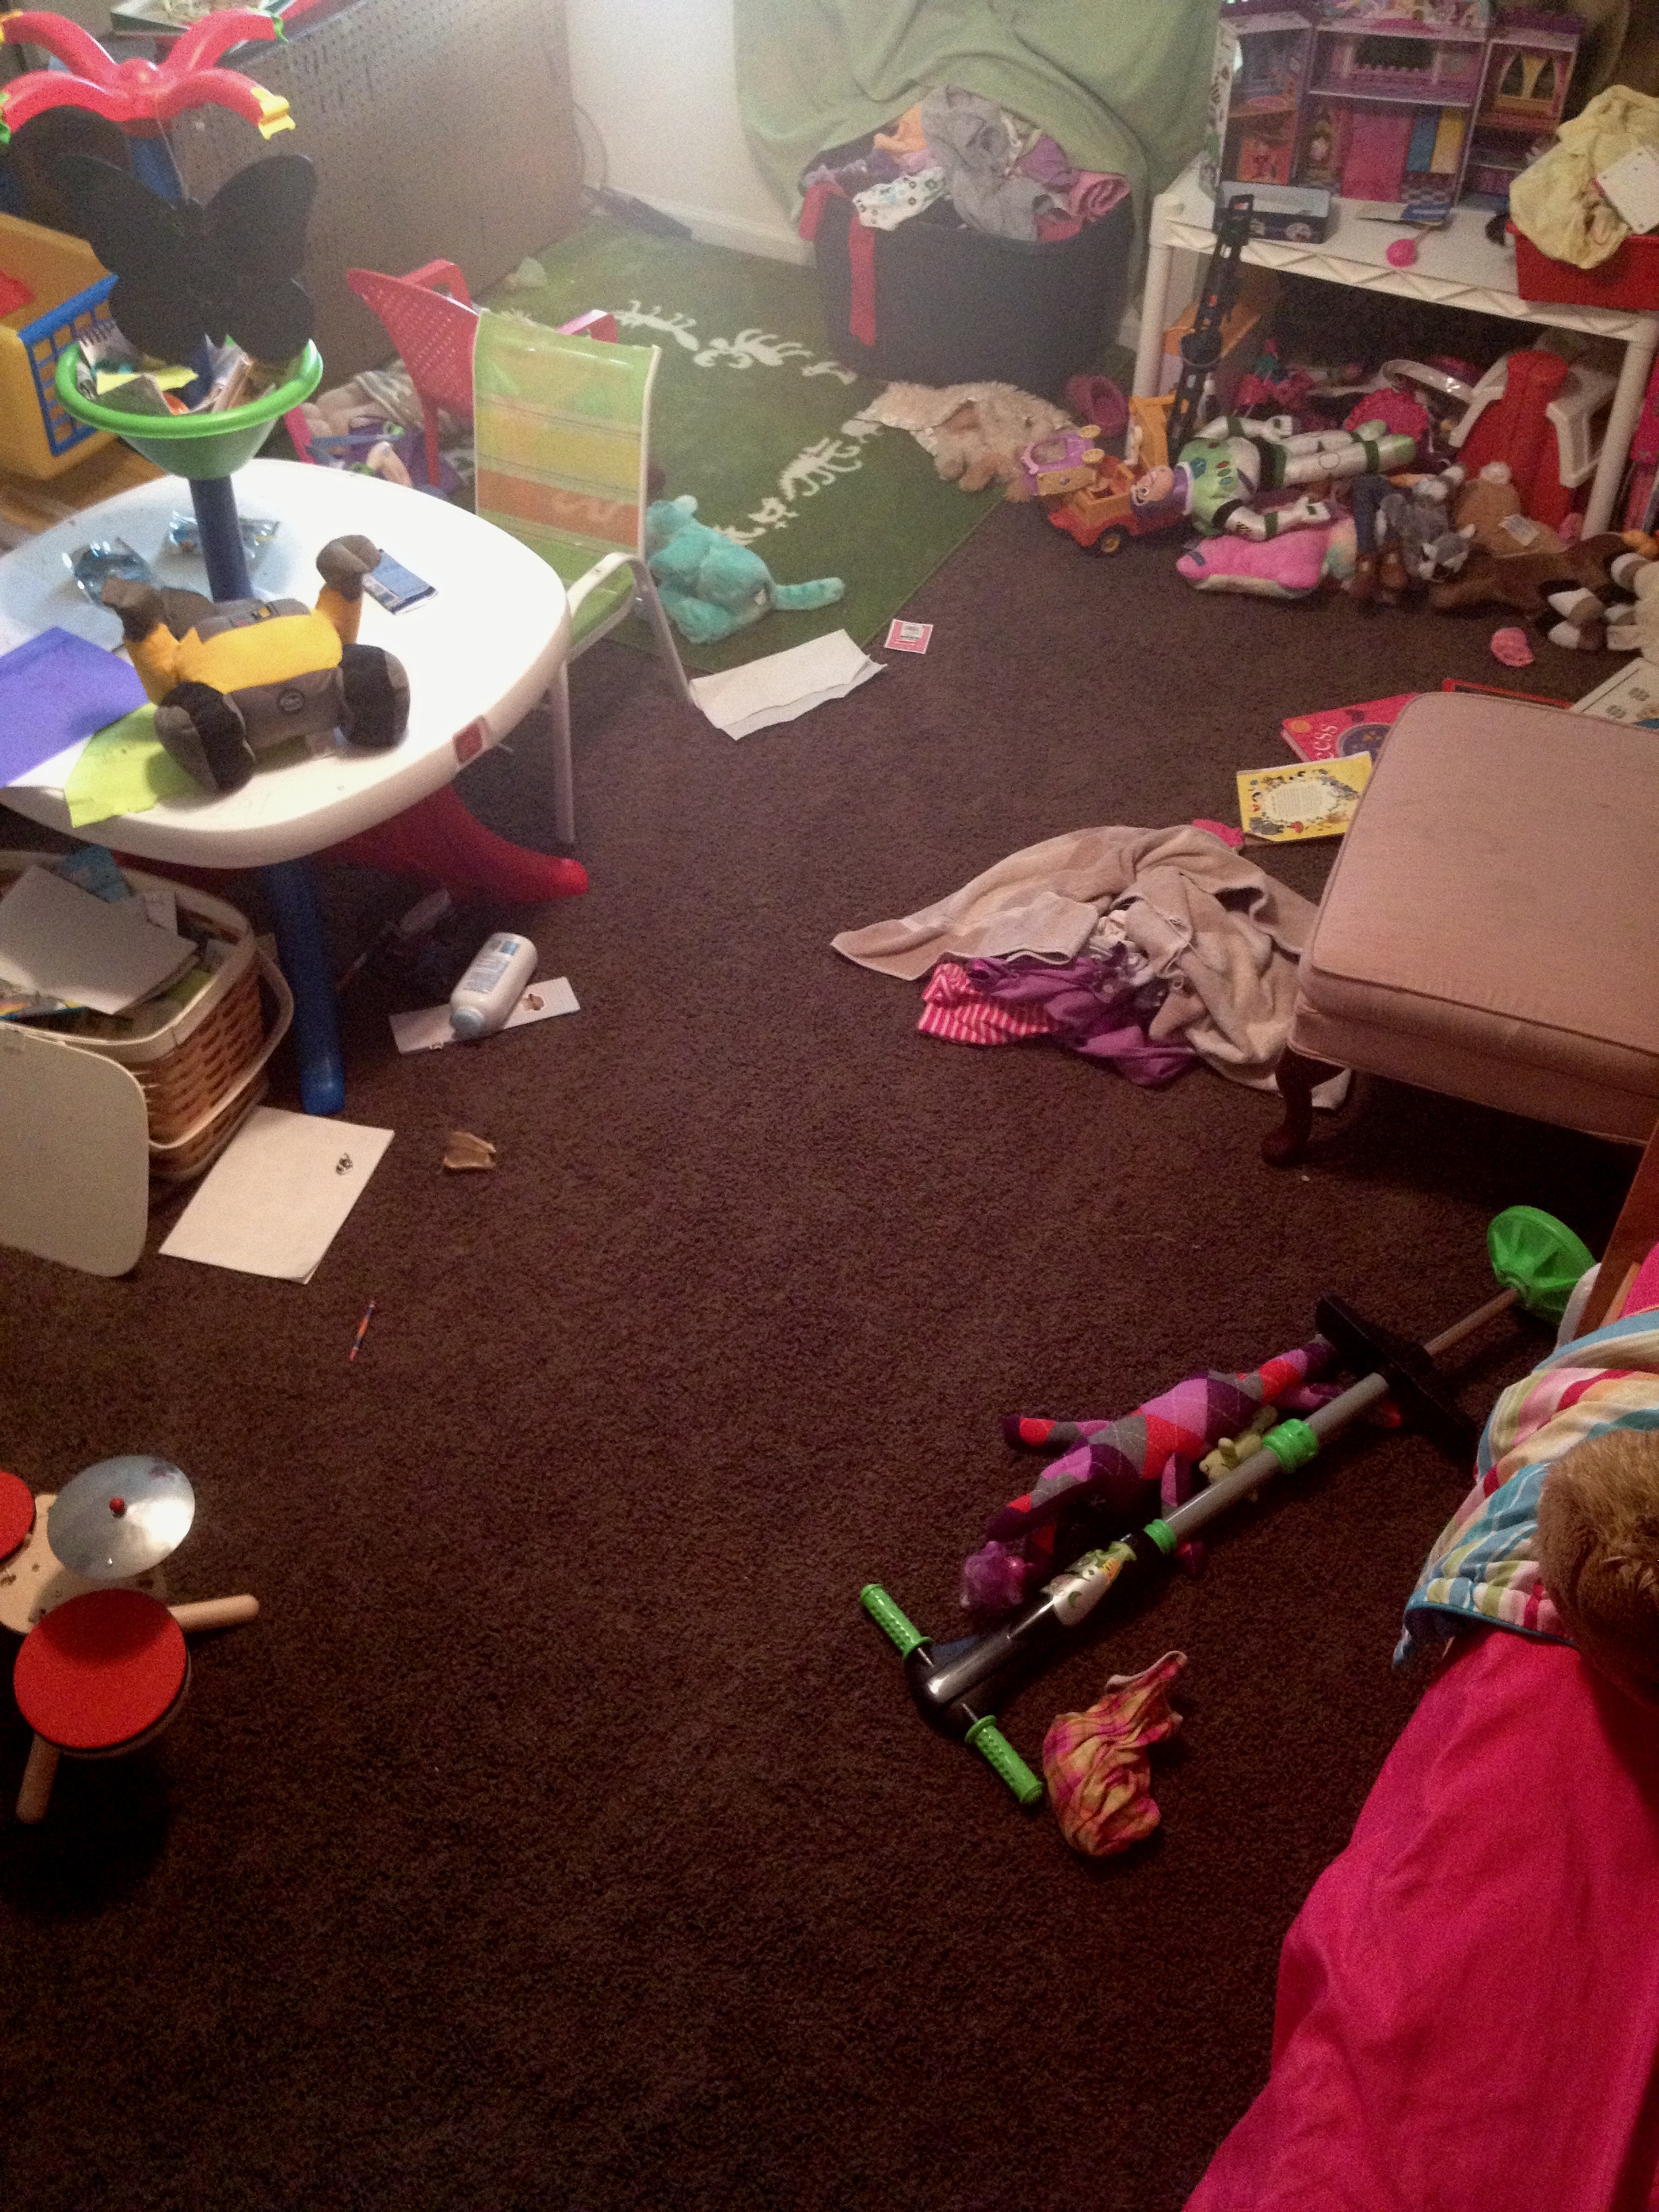 A Messy Kids Room : KIDS ROOM CLEANING CHECKLIST - Queen of Clean ...